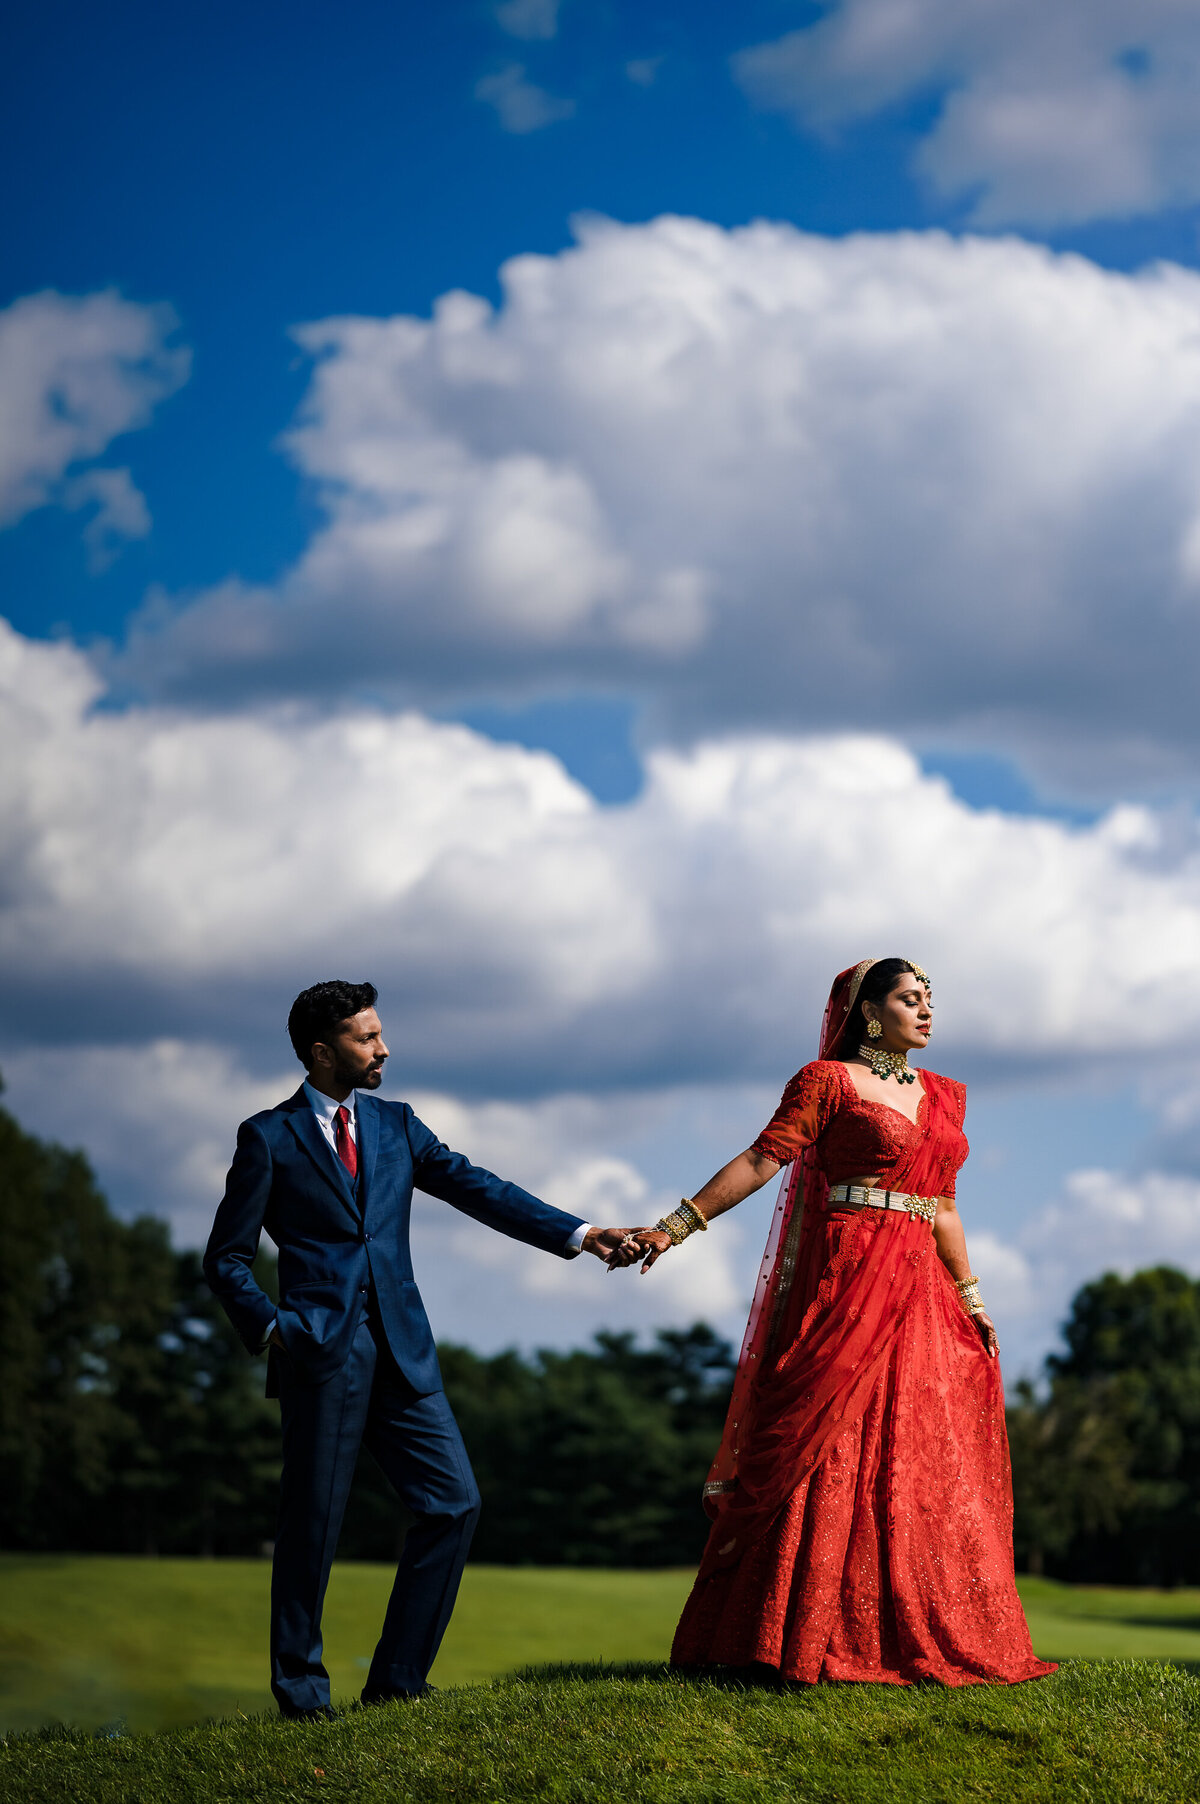 Ishan Fotografi is your NYC Indian wedding photography specialist.